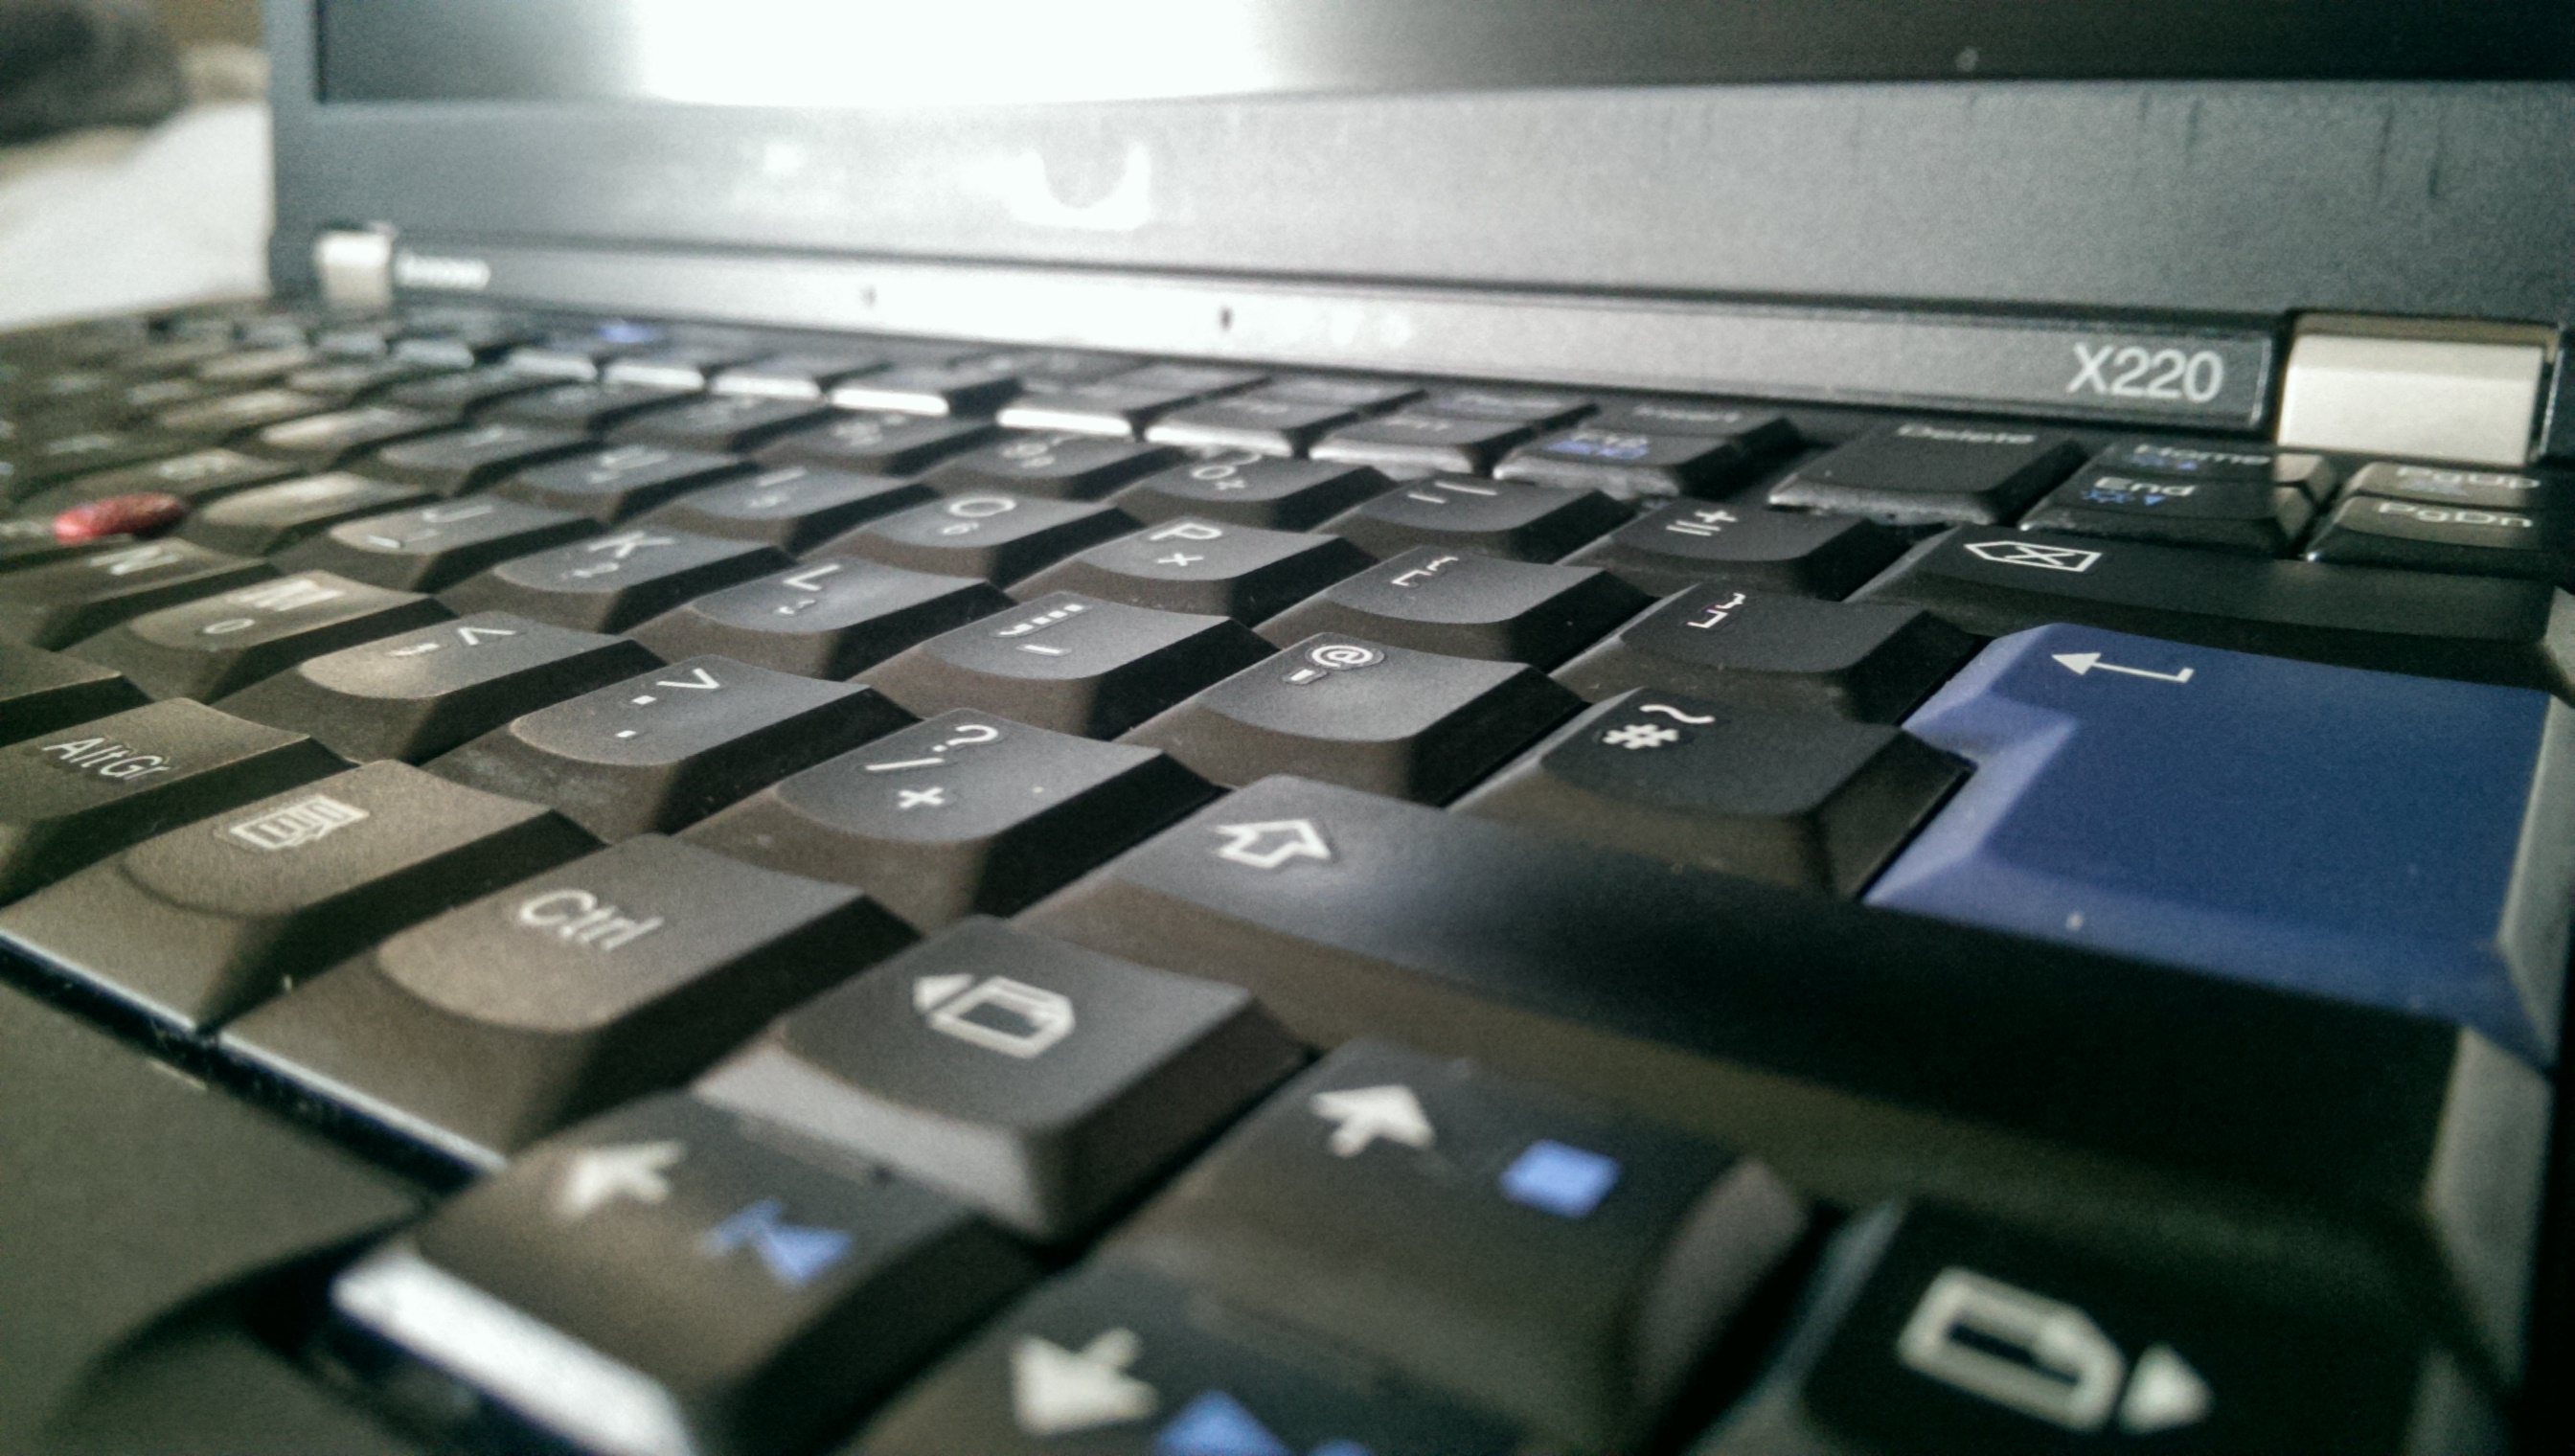 The retro-style ThinkPad keyboard, with the blue Enter key.